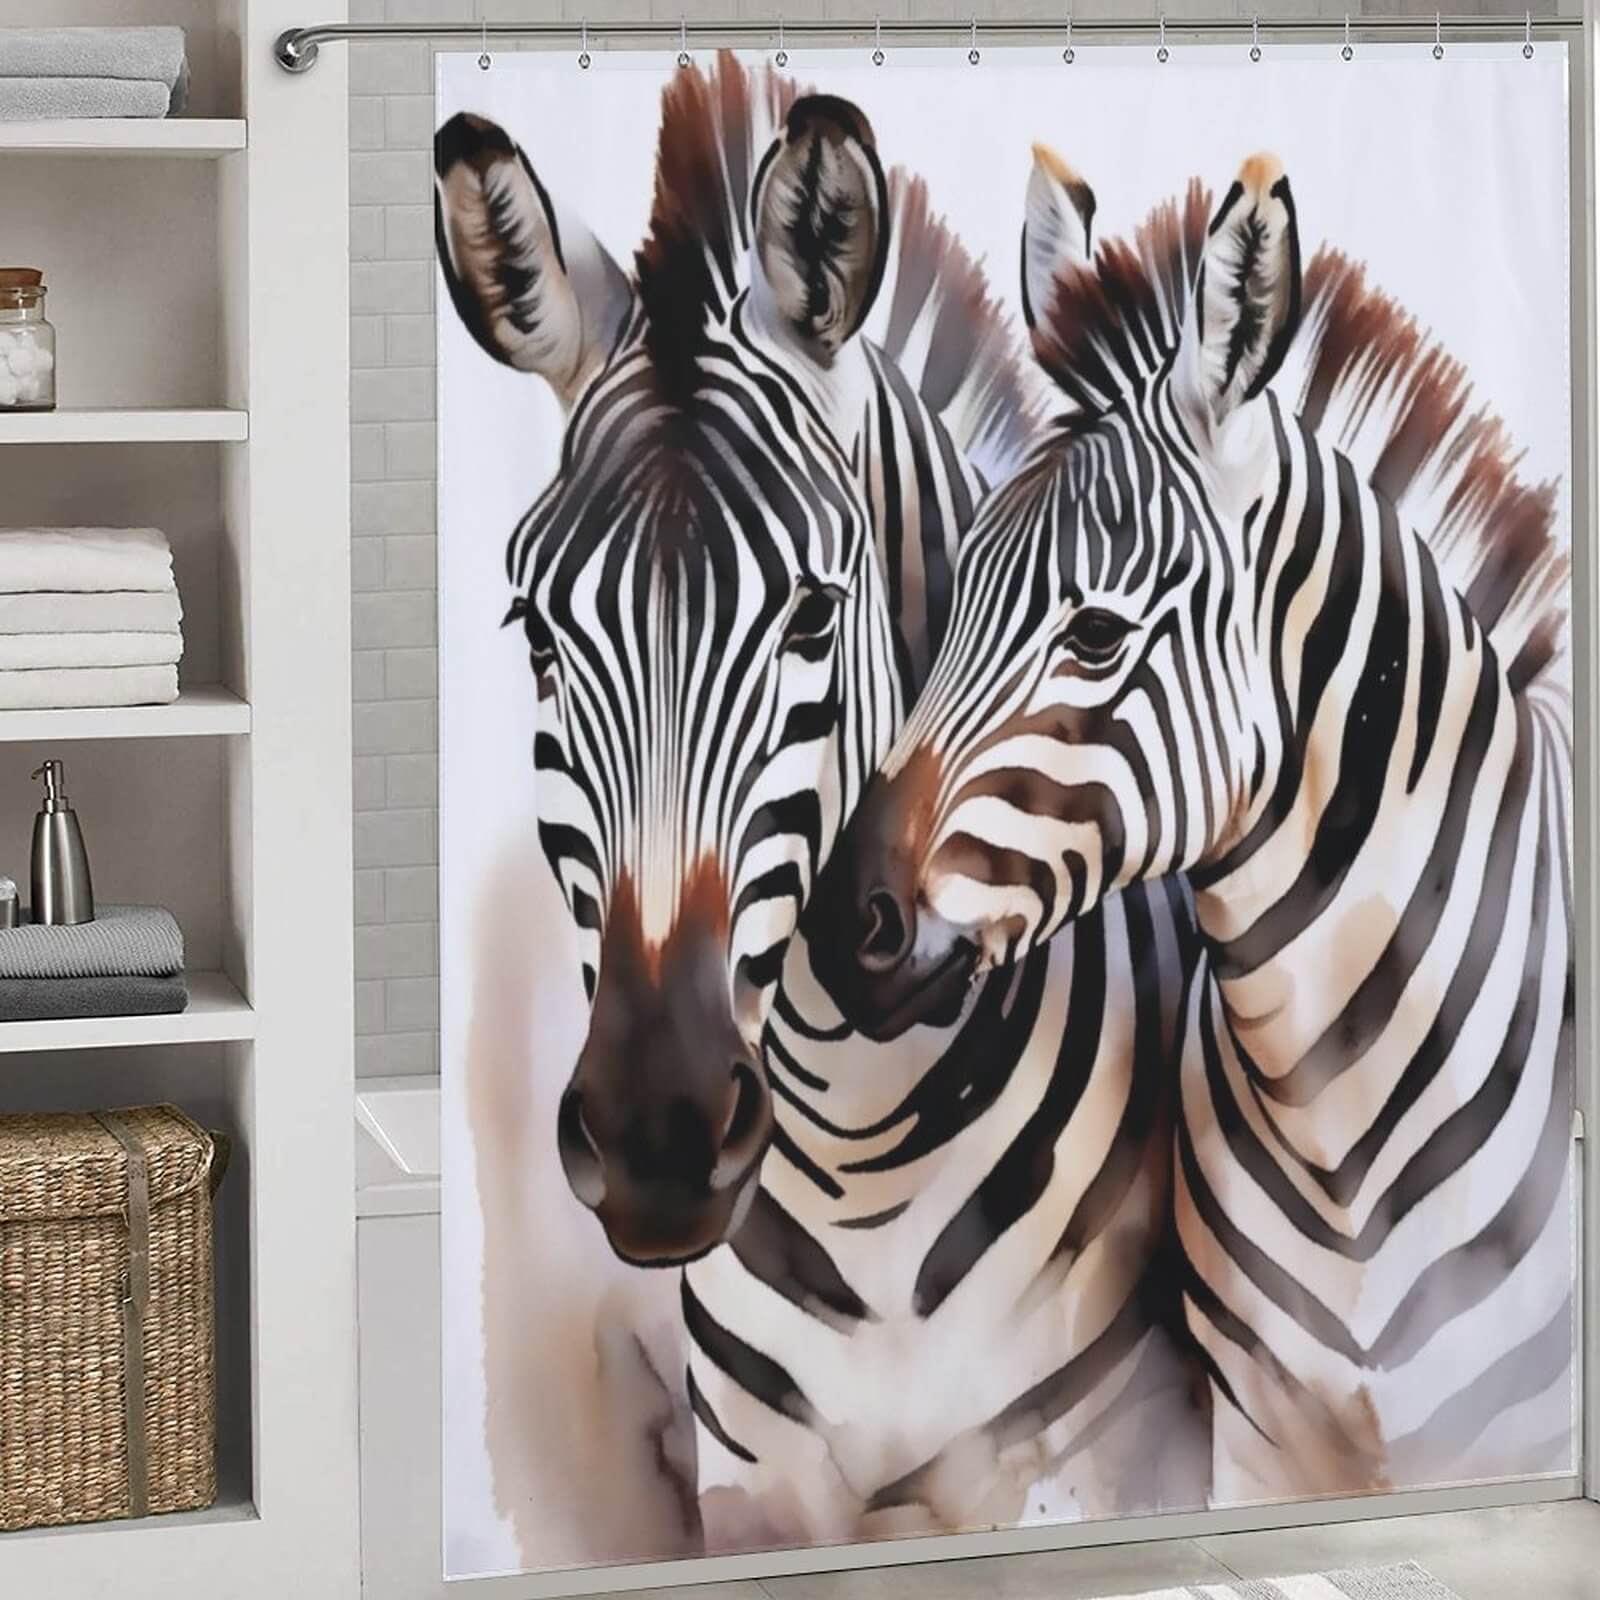 A Watercolor Zebra Shower Curtain-Cottoncat, made of 100% polyester and perfect for a waterproof bathroom decor, by Cotton Cat.